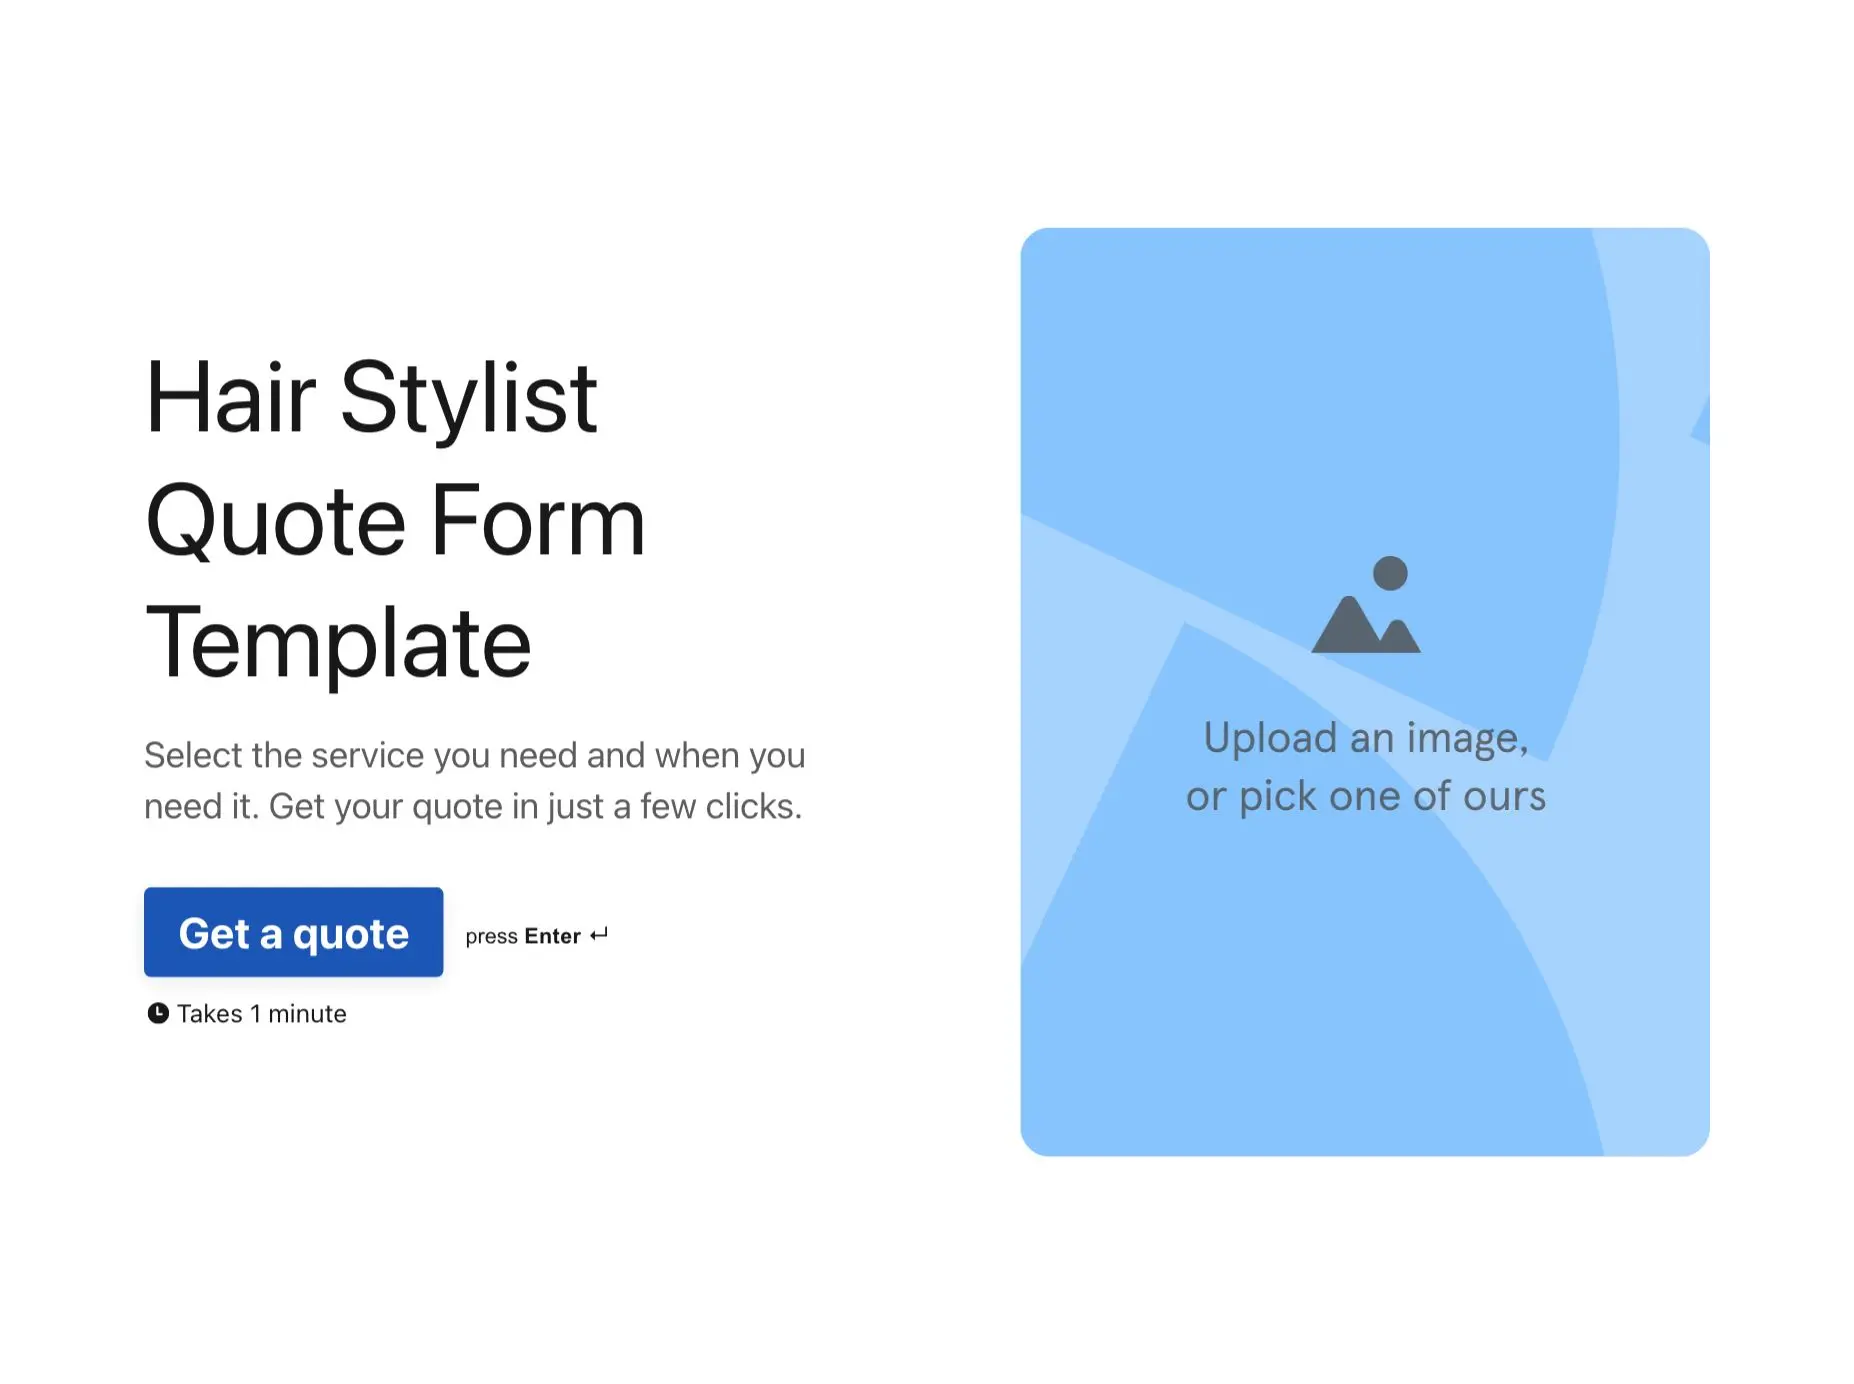 Hair Stylist Quote Form Template Hero